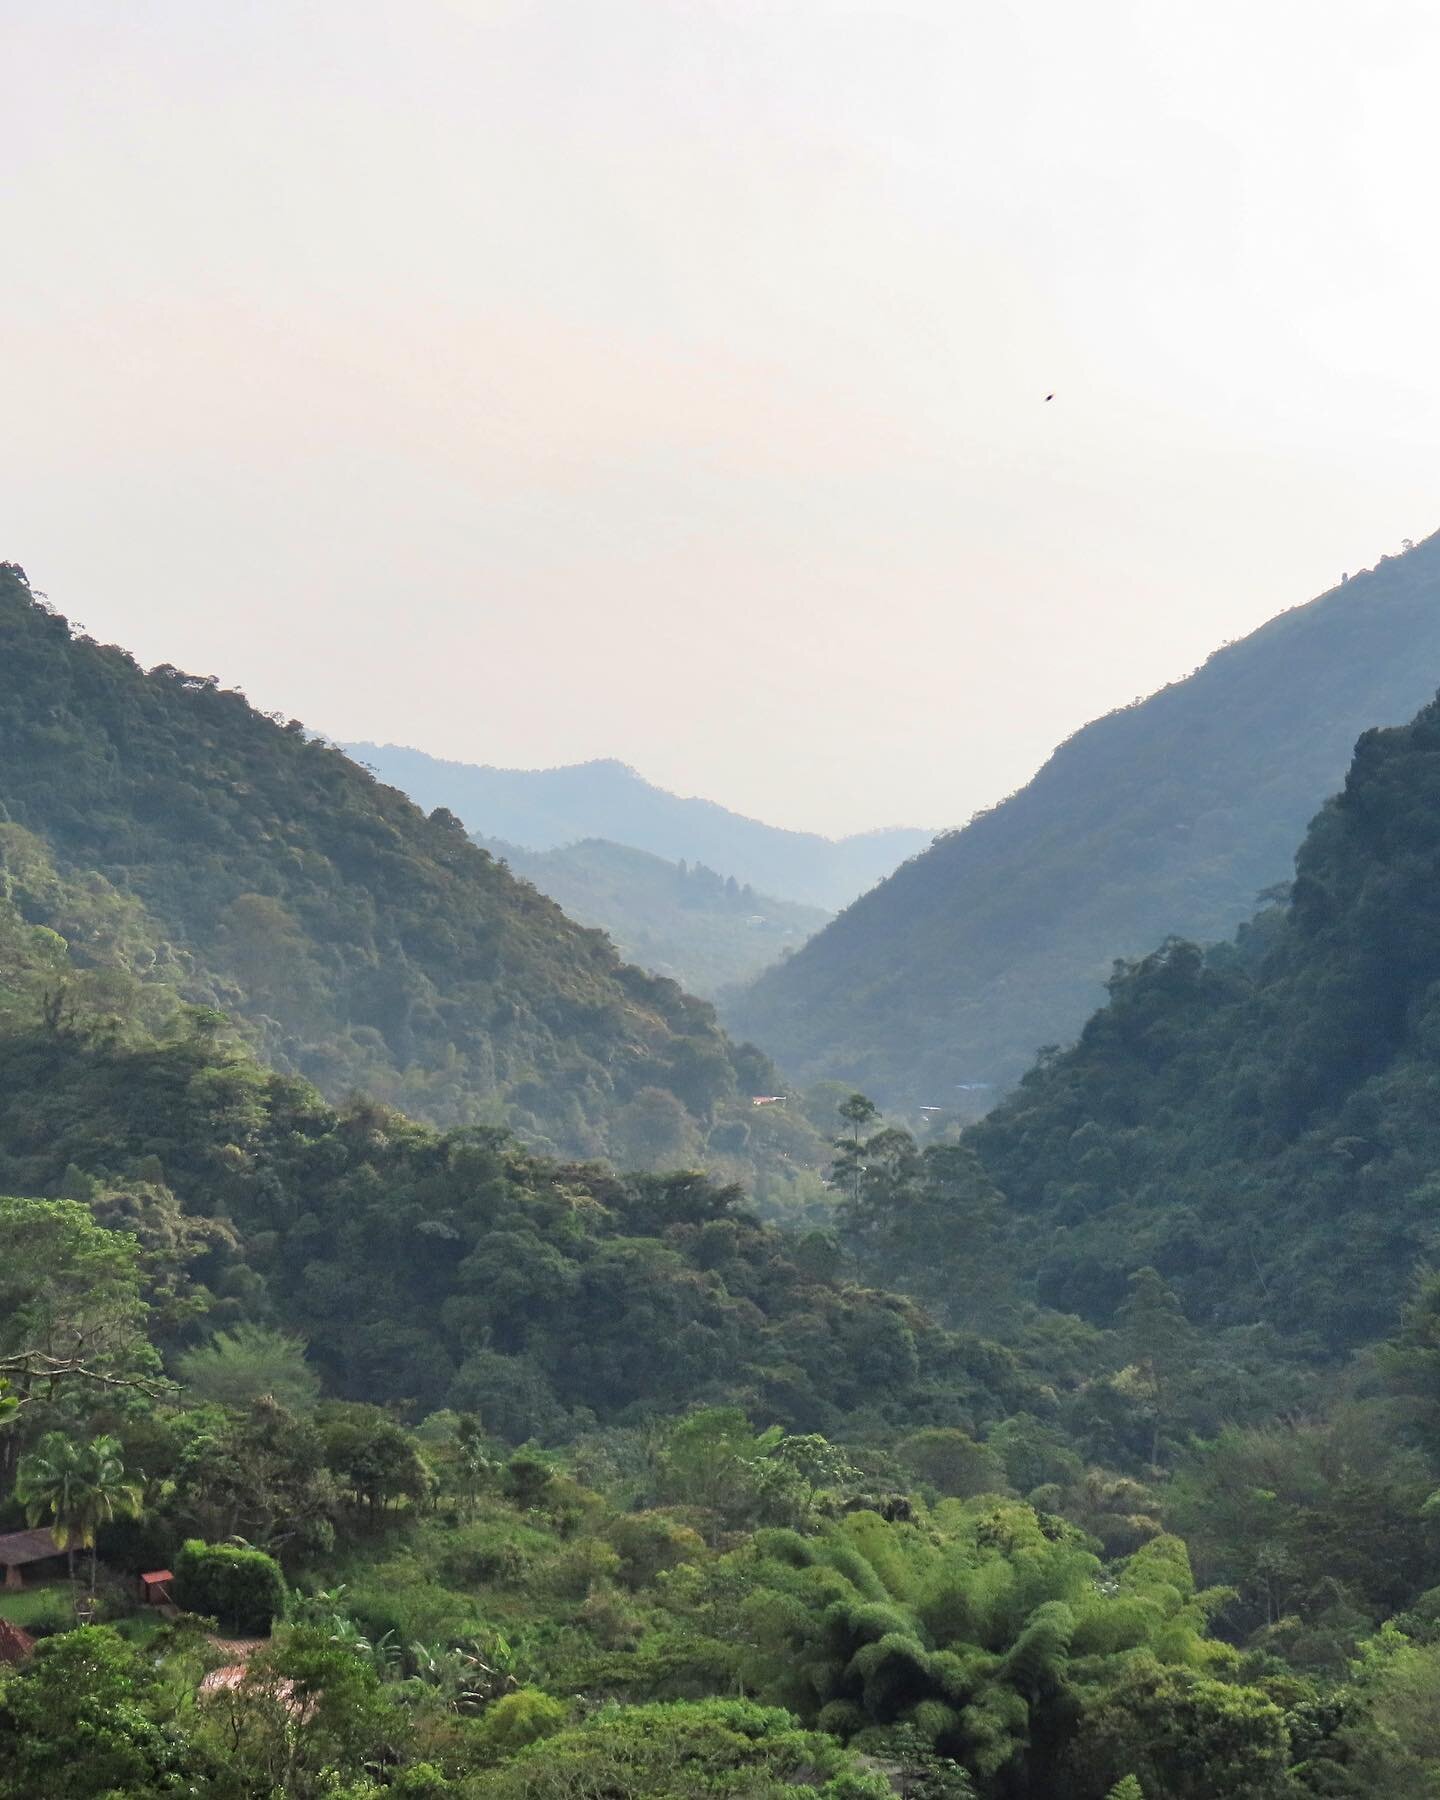 &ldquo;The world is big and I want to get a good look at it before it gets dark.&rdquo; &ndash; John Muir

And so here I am on a spur-of-the-moment adventure in the Colombian Andes to see birds with a best friend. The Cauca valley has the most endemi